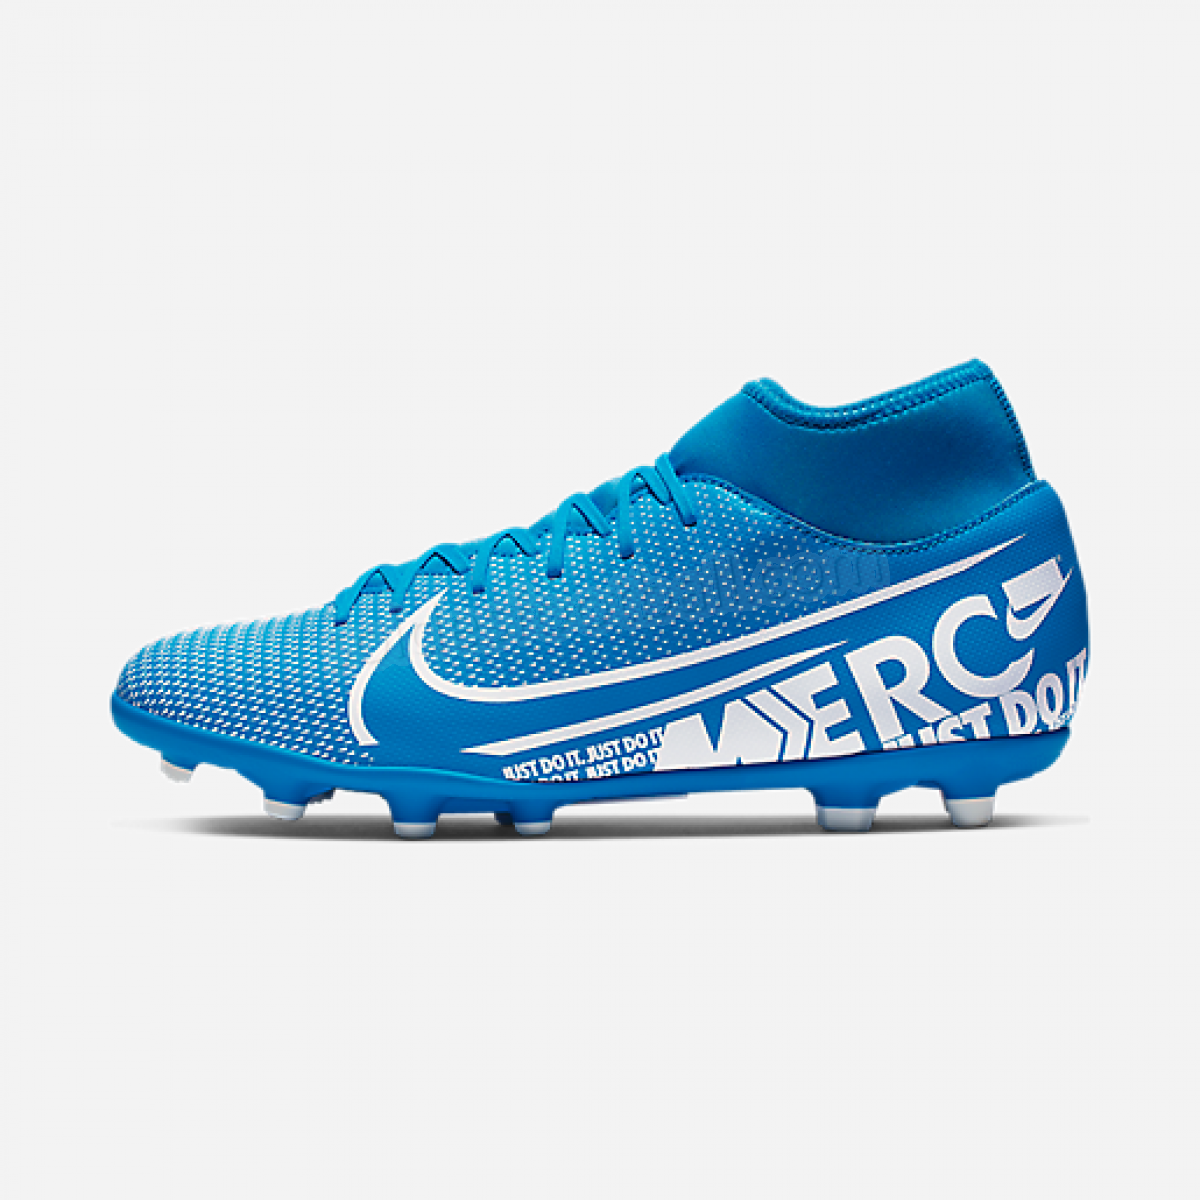 Chaussures de football moulées homme SUPERFLY 7 CLUB FG/MG-NIKE en solde - Chaussures de football moulées homme SUPERFLY 7 CLUB FG/MG-NIKE en solde